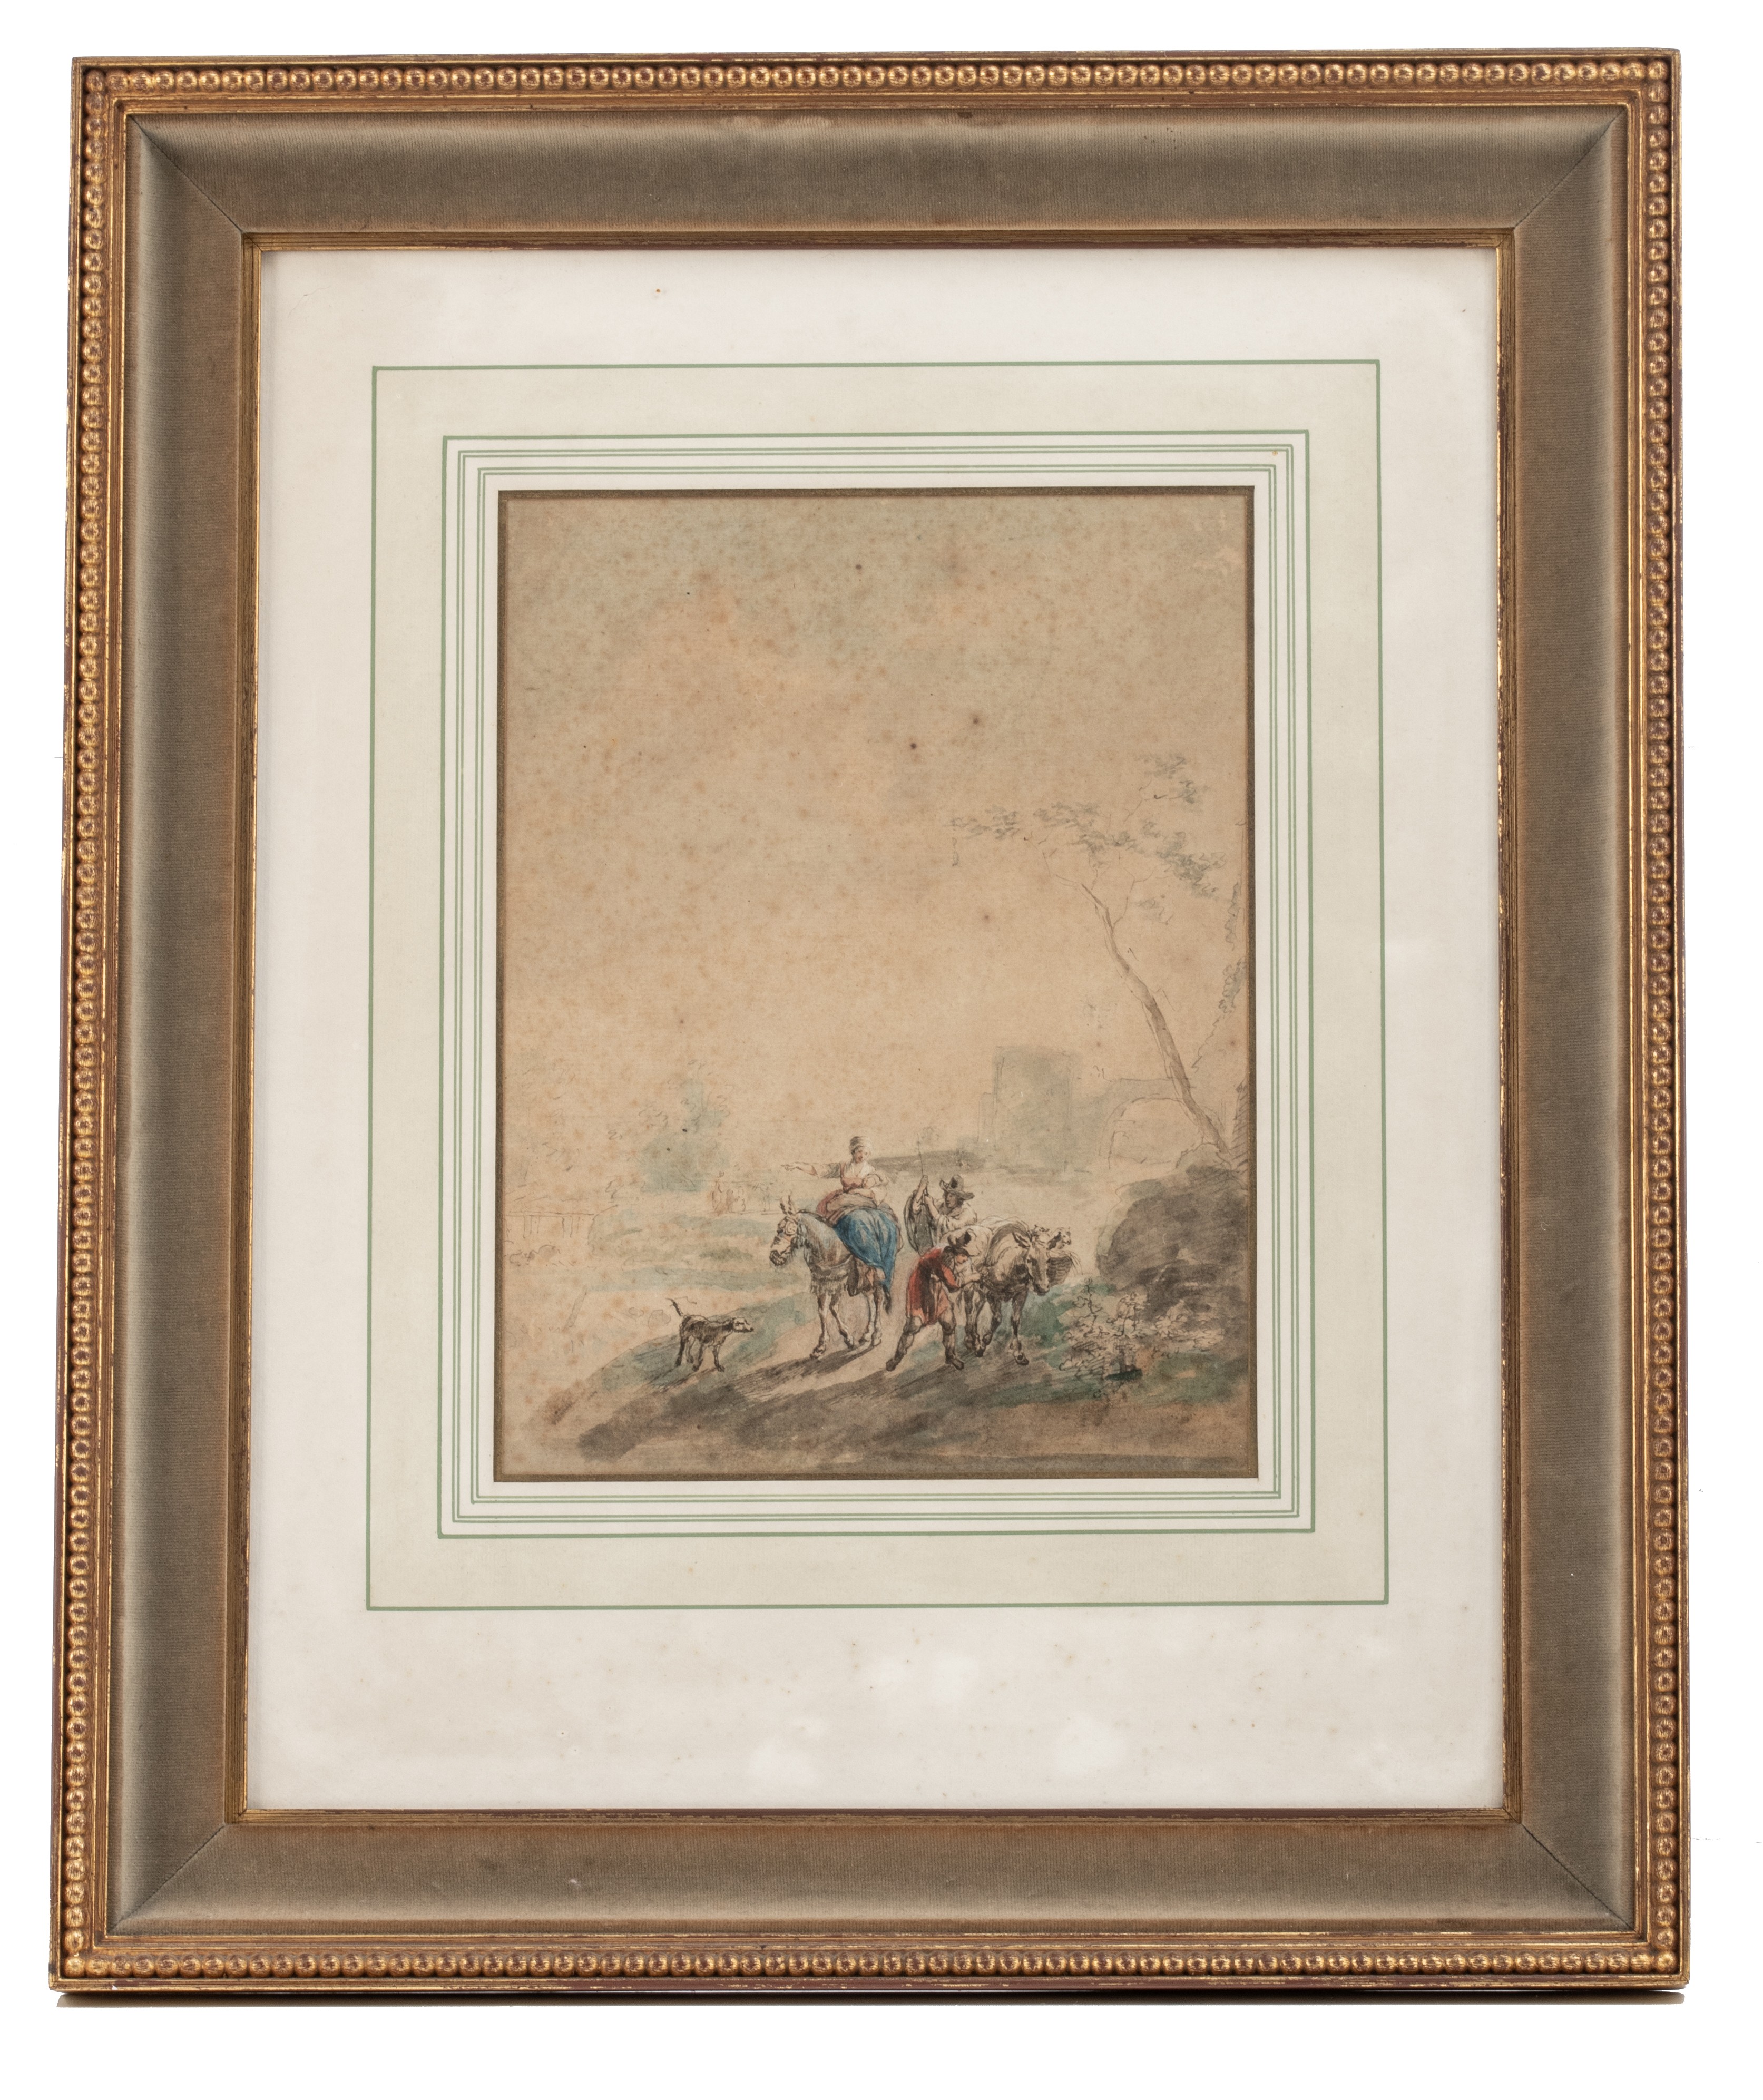 Travellers in a landscape, ink and watercolour on laid paper, 18thC French School, 27,5 x 21 cm - Image 2 of 4